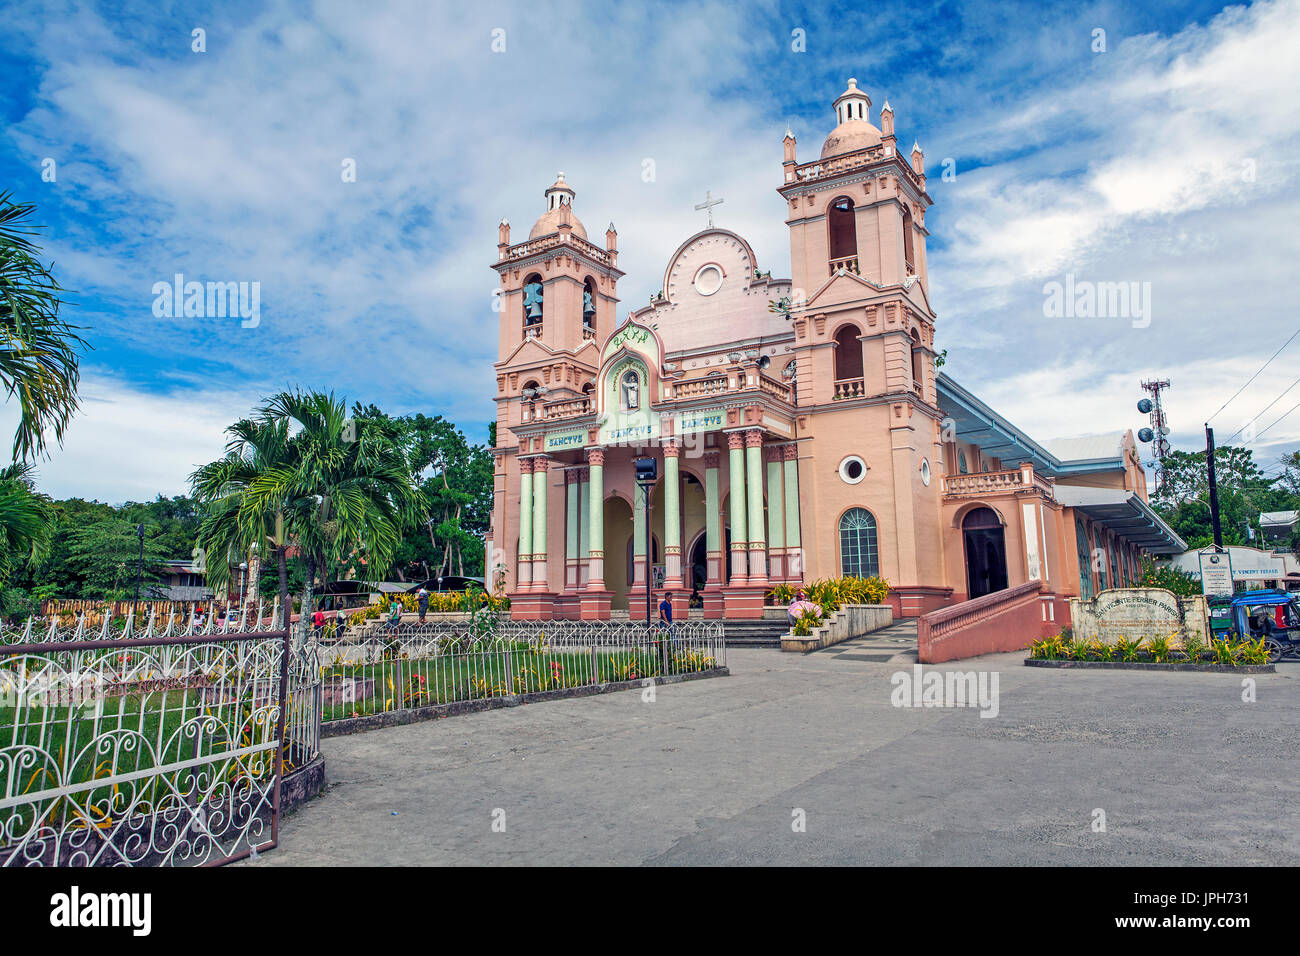 Facade of 160-year old Archdiocesan Catholic Cathedral and Shrine of San Vincent Ferrer at Bogo City, Cebu Island, Philippines. Stock Photo